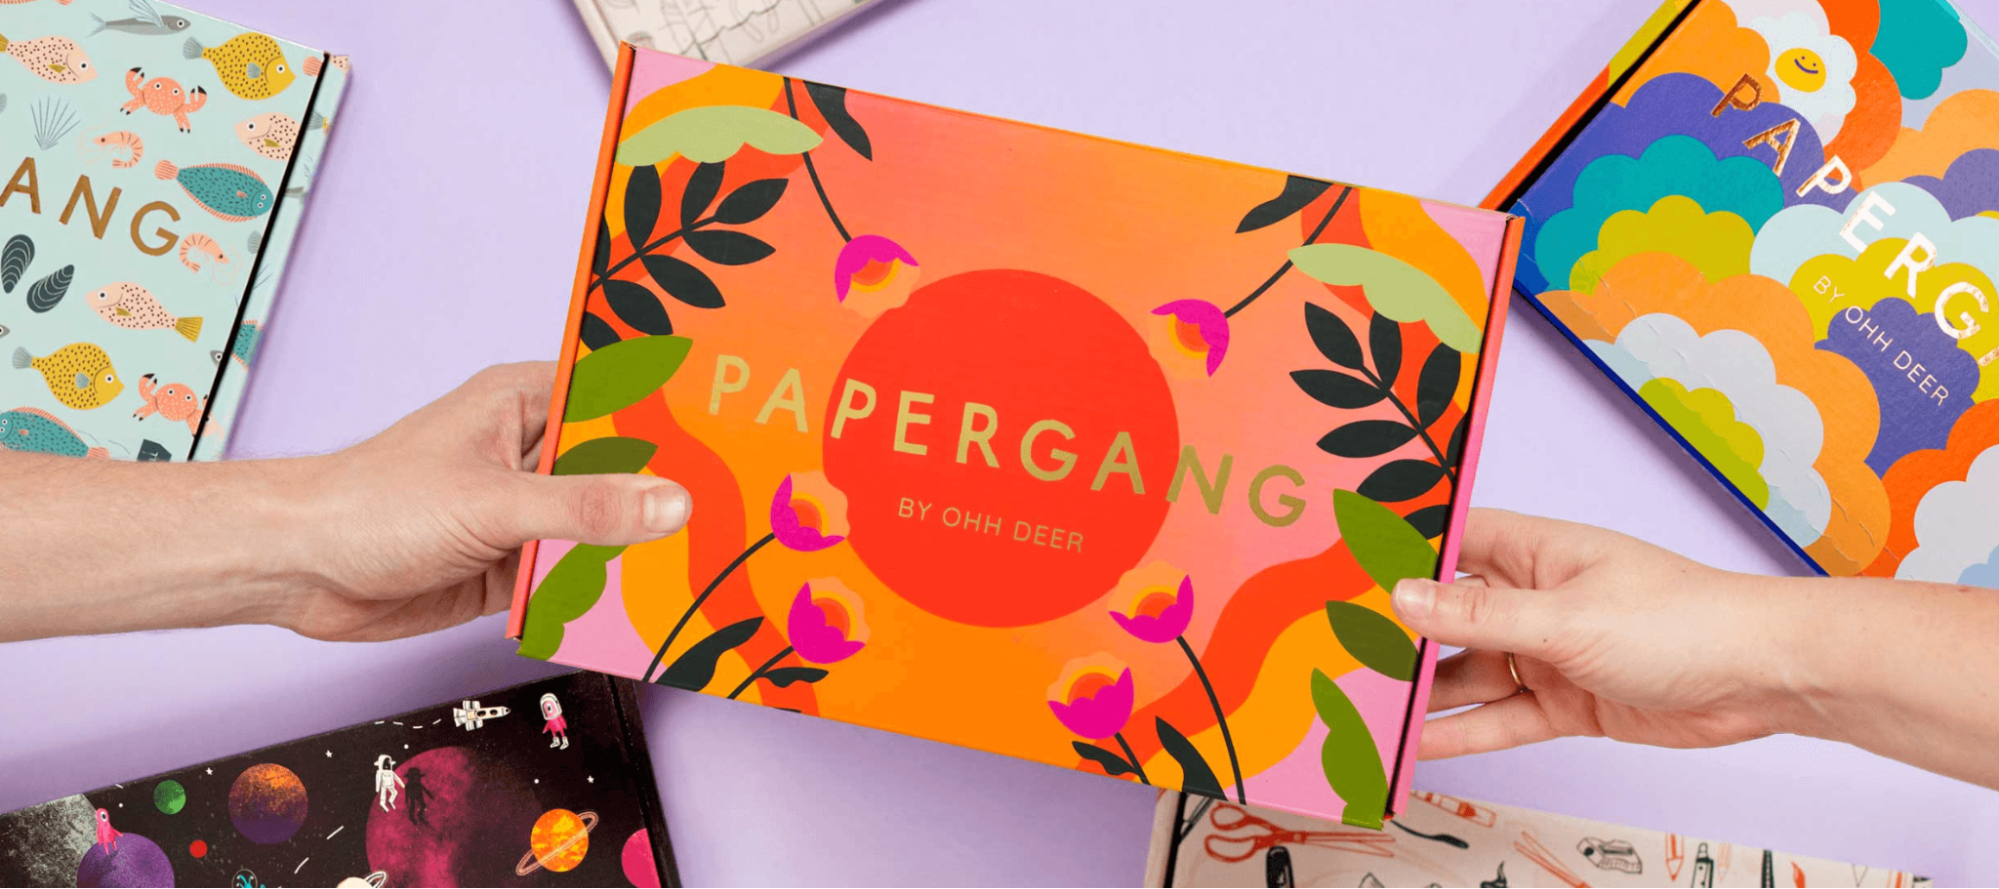 Two hands holding a box with the Papergang logo on it surrounded by other designed boxes on the table.